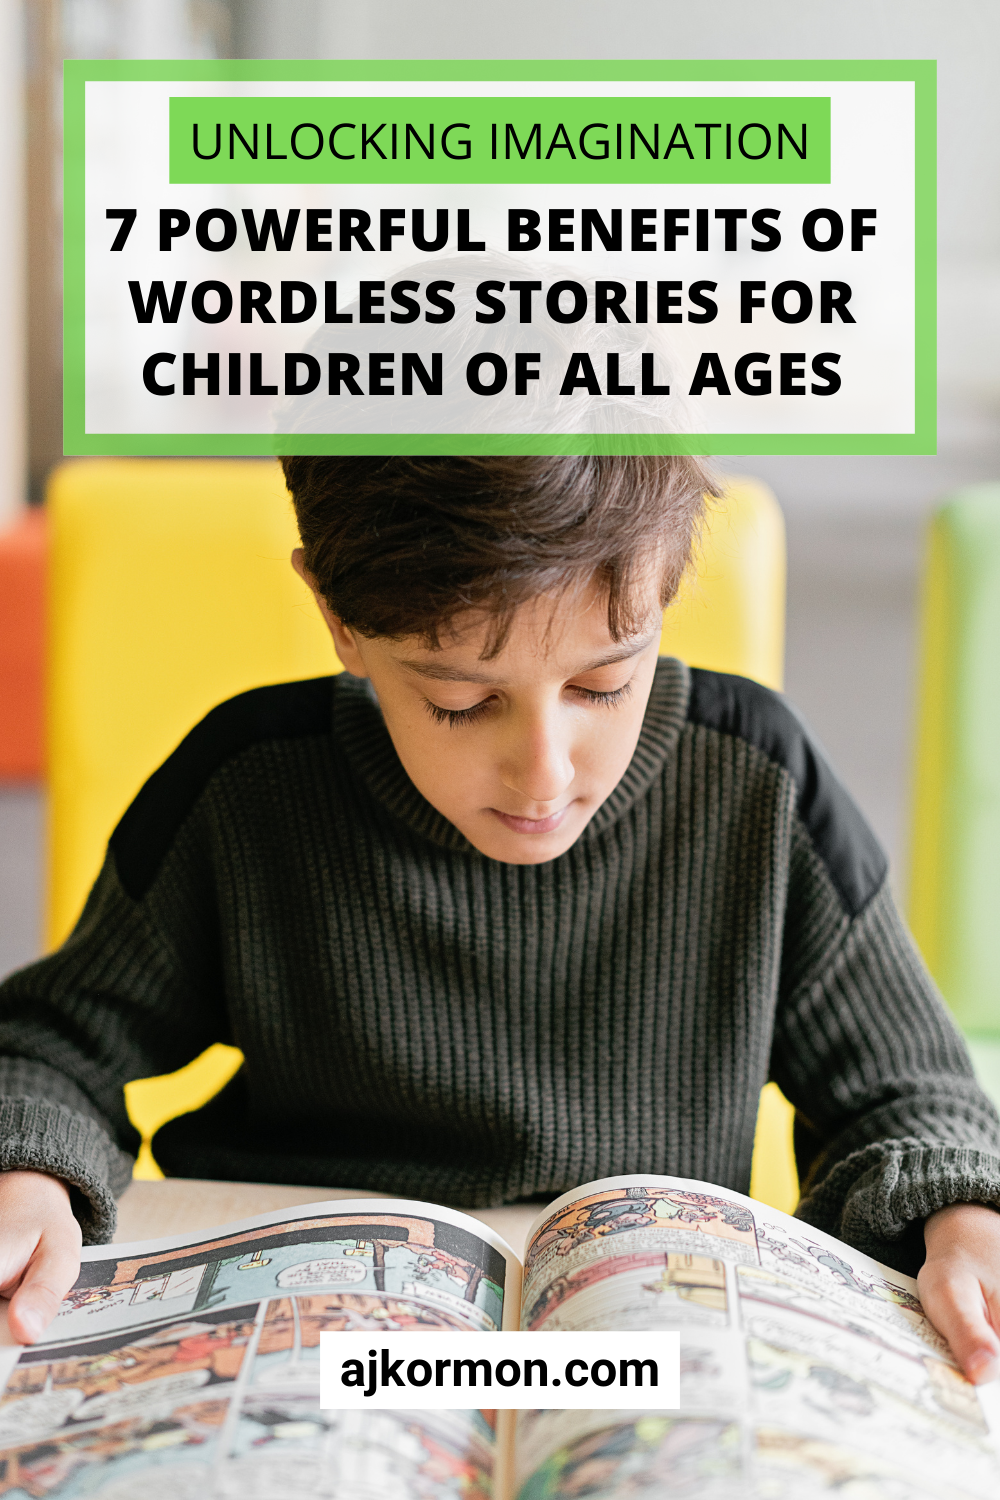 7 Powerful Benefits of Wordless Stories for Children of All Ages